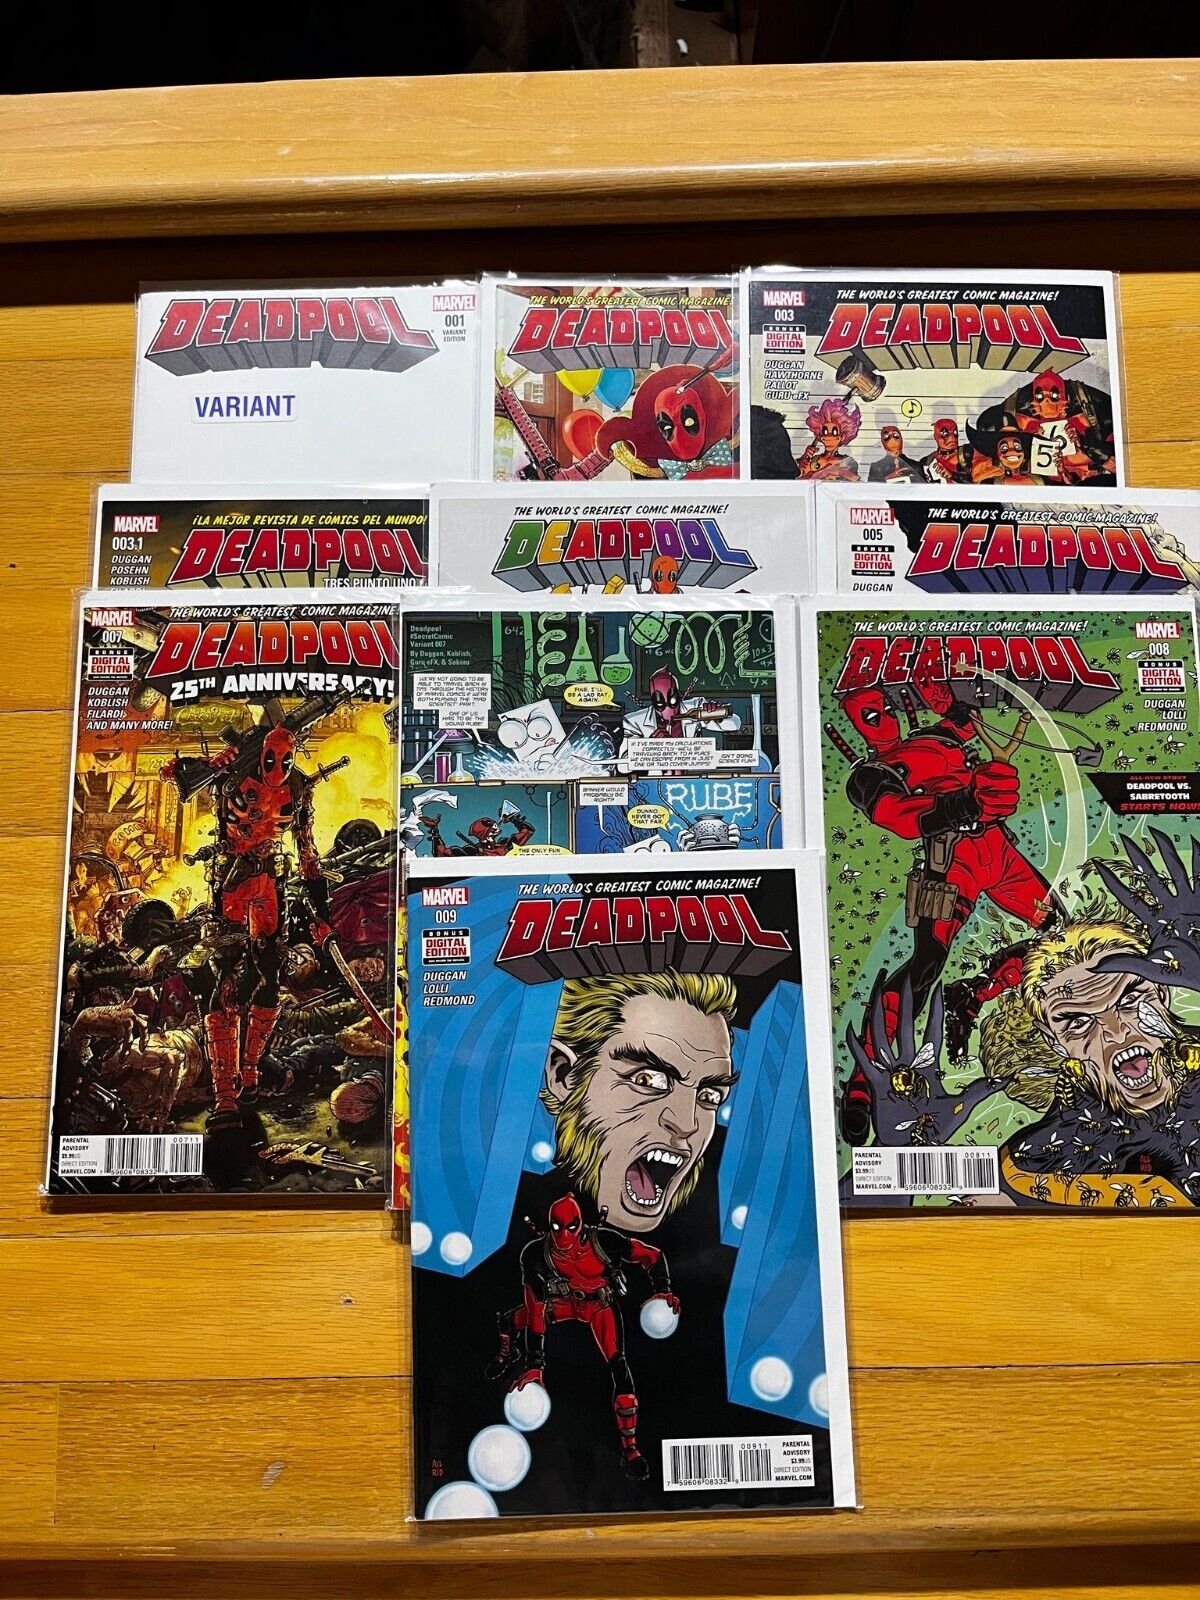 Deadpool Vol 6 Lot Issues #1-5 Two variant covers #7 and #8-9 Great Condition